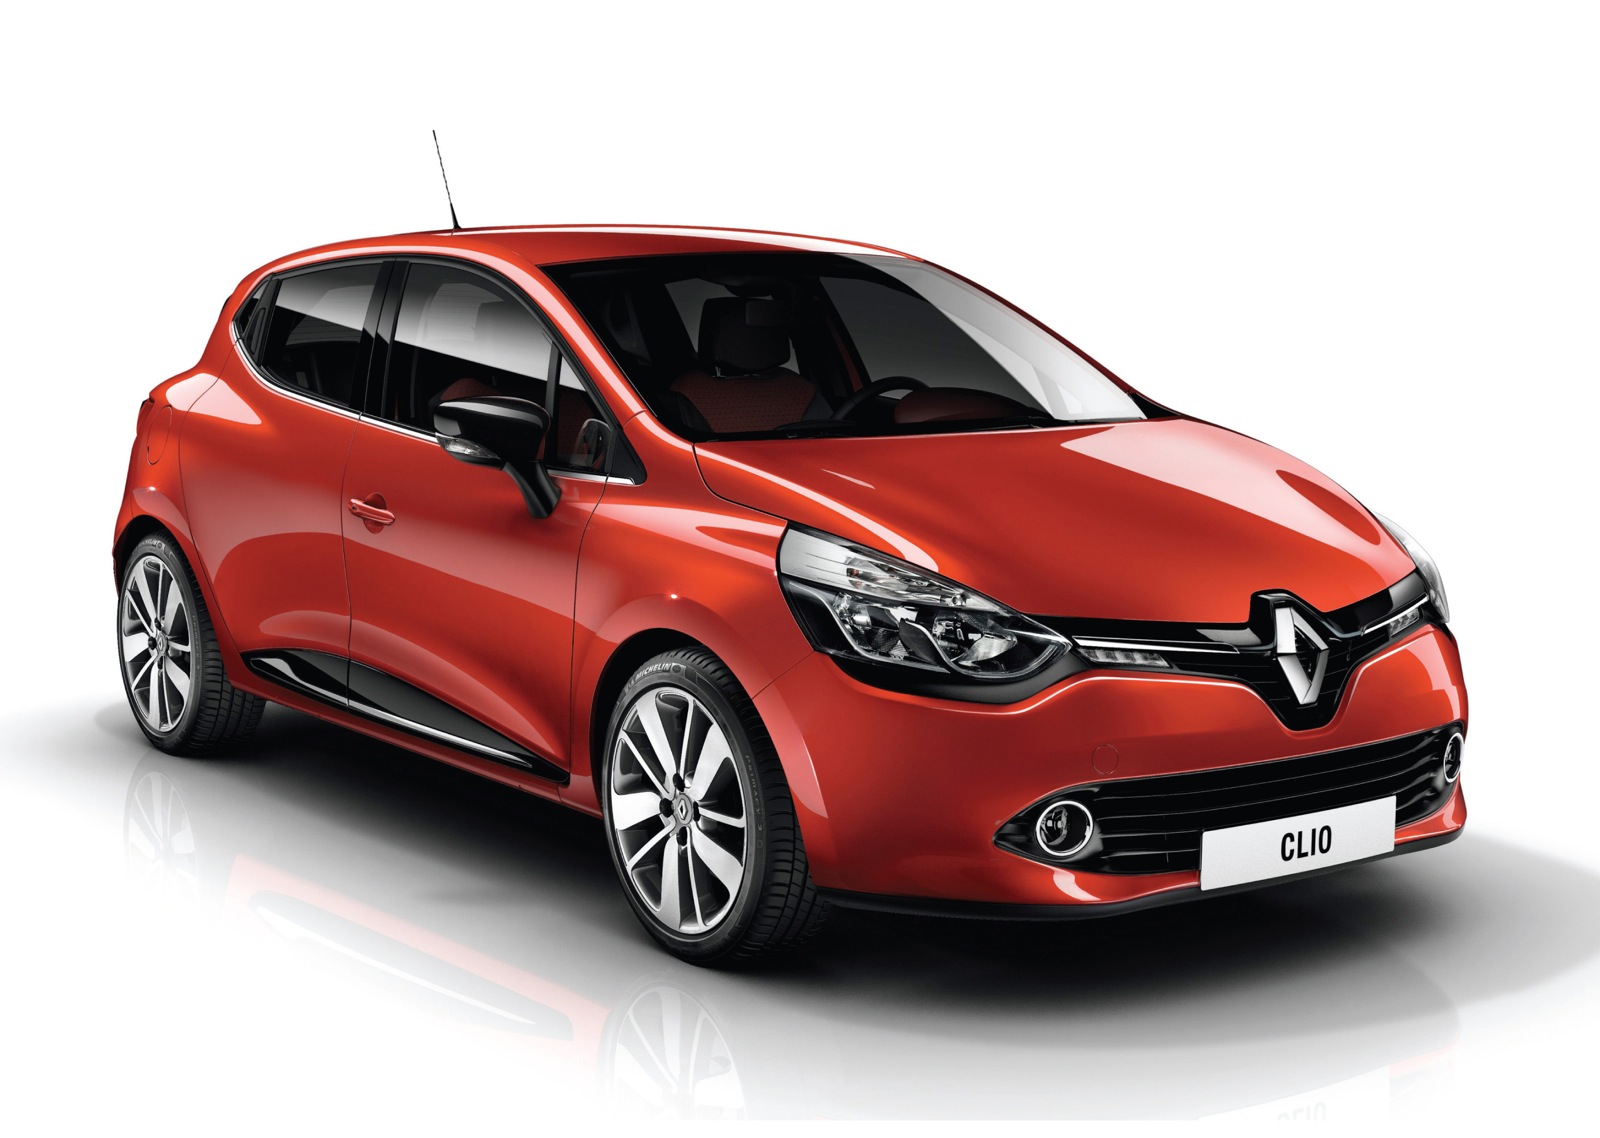 https://images.hgmsites.net/hug/the-fourth-generation-renault-clio_100394878_h.jpg